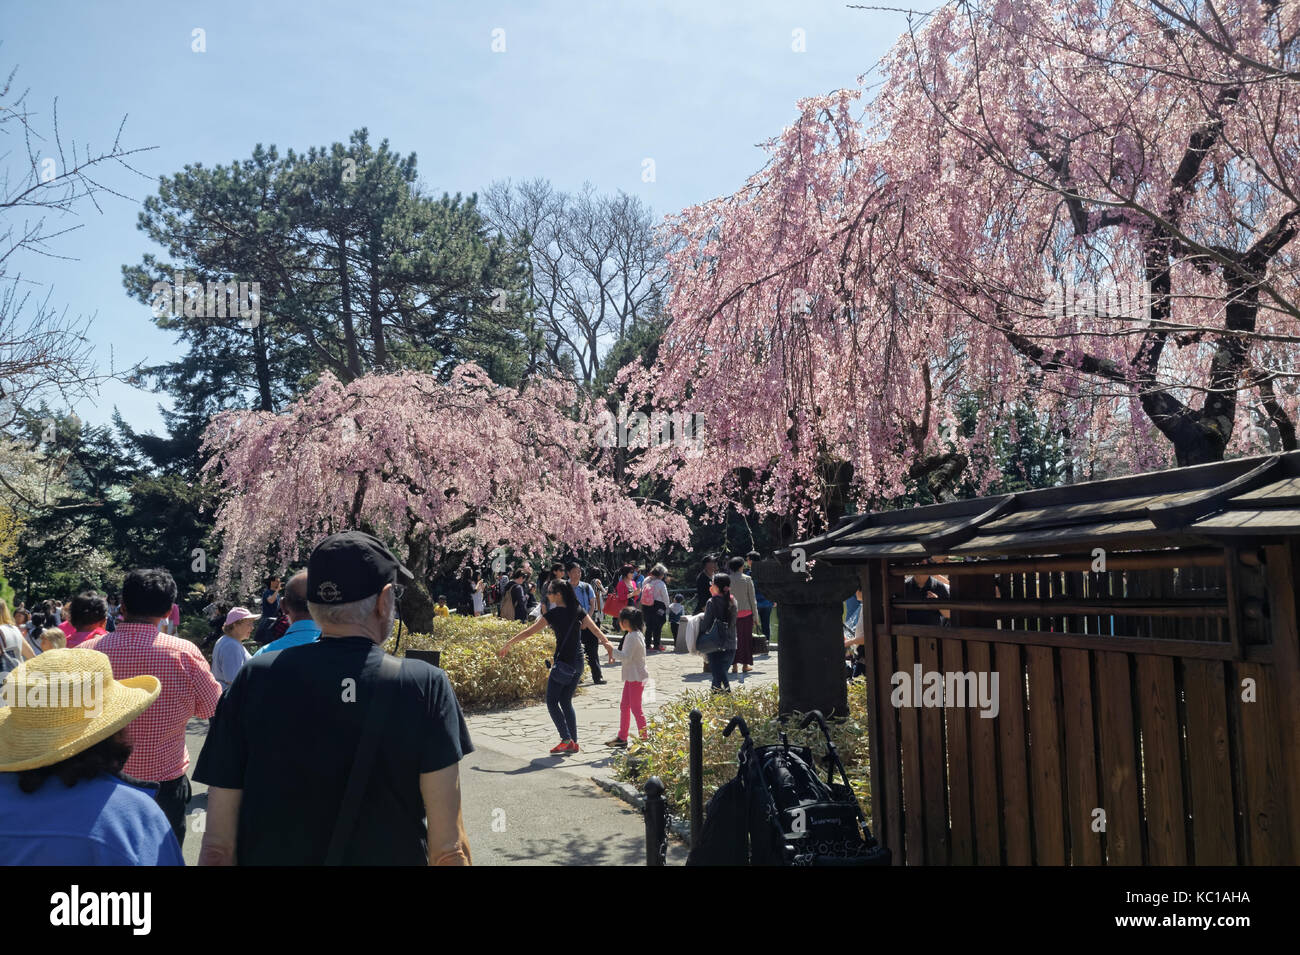 Visitors and tourists walking through the Brooklyn Botanic gardens enjoying the Spring cherry blossom trees bloom. Stock Photo